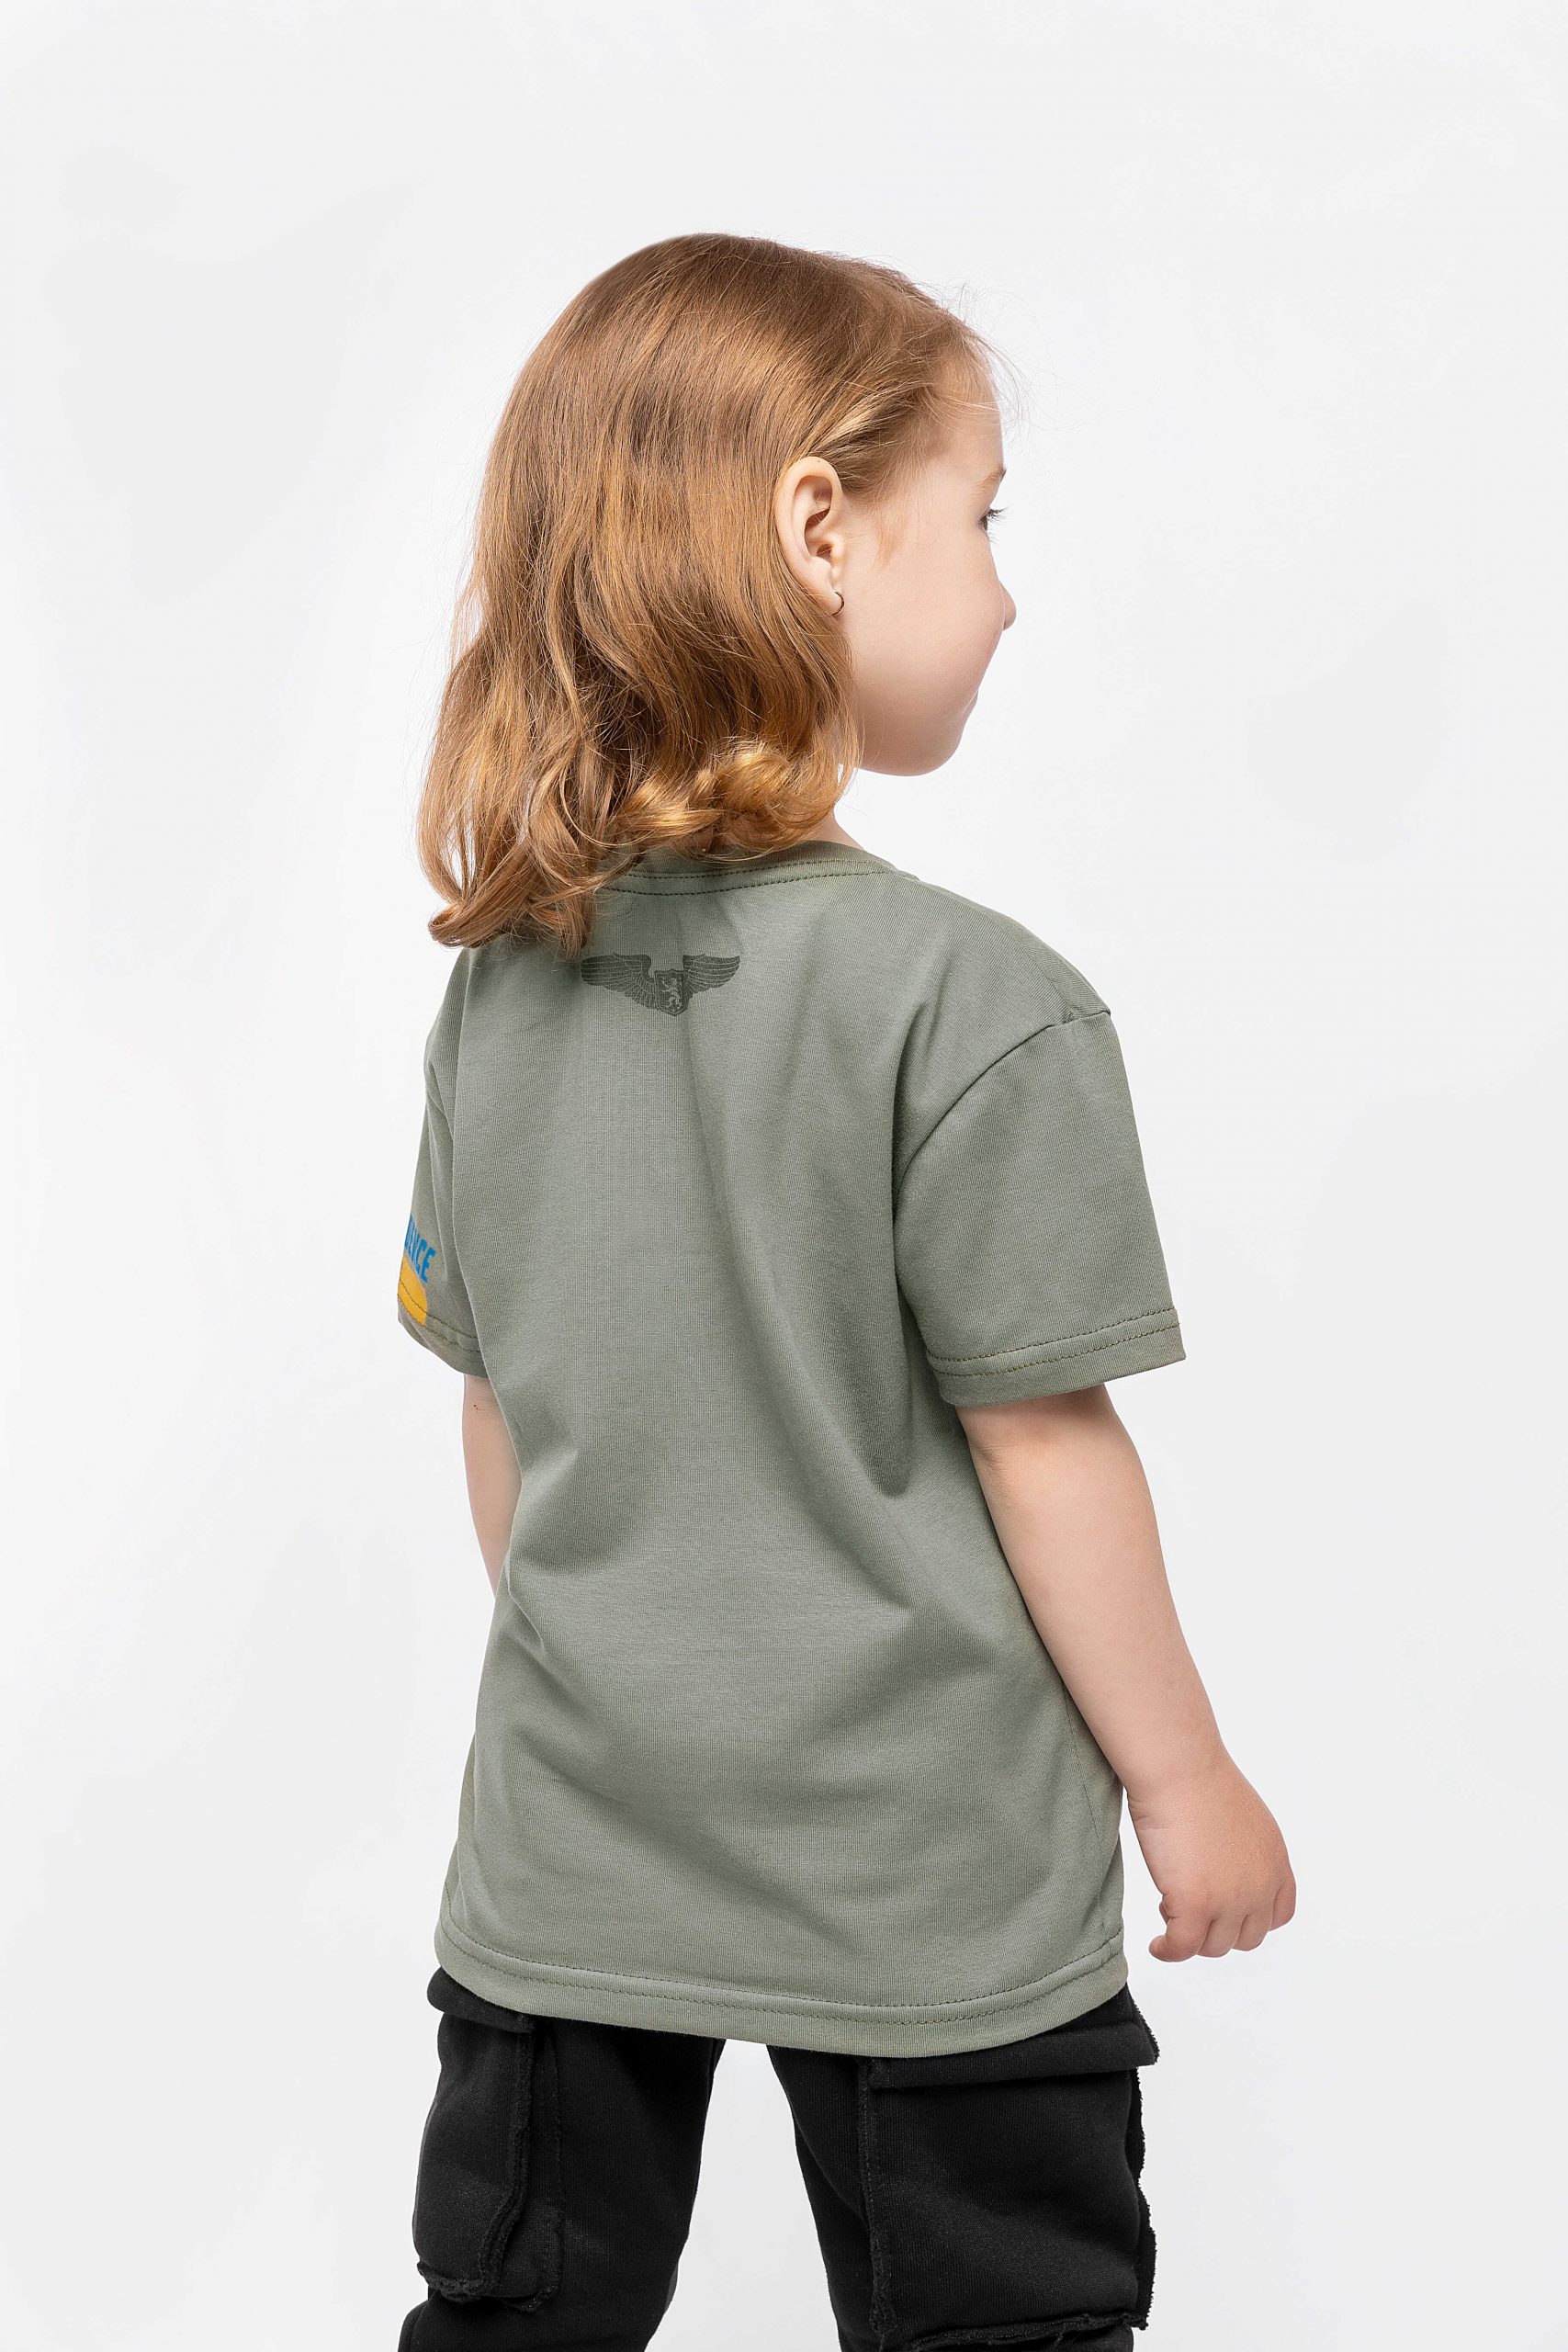 Kids T-Shirt We Are From Ukraine.h. Color khaki. 
Material: 95% cotton, 5% spandex.